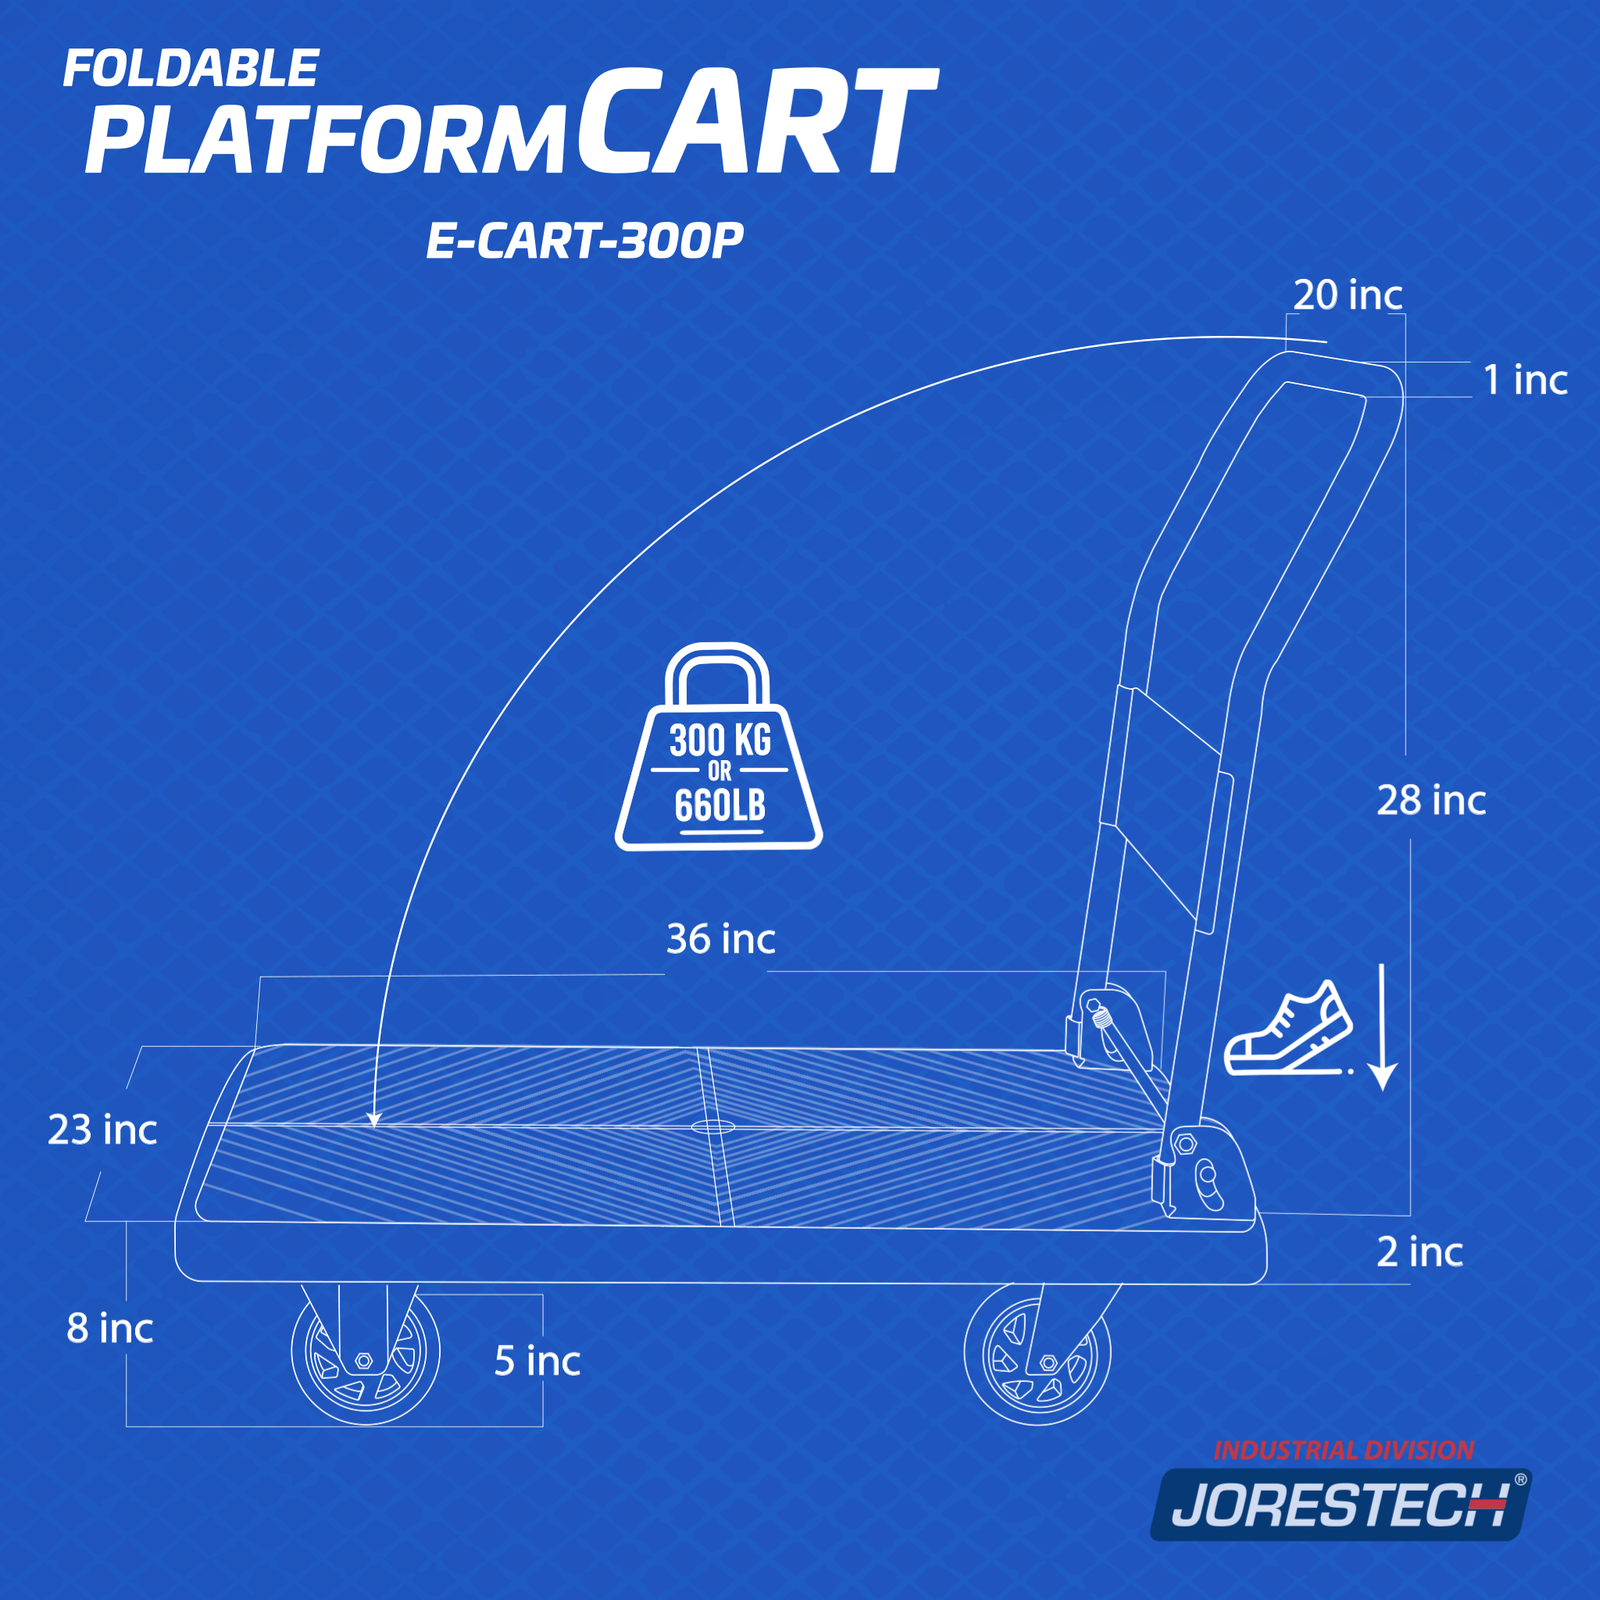 Graphic of the jorestech foldable platform cart showing the max weight the cart can handle which is 300KG or 660LB and also measurements of  the platform of the dolly cart: 36inch x 23 inch